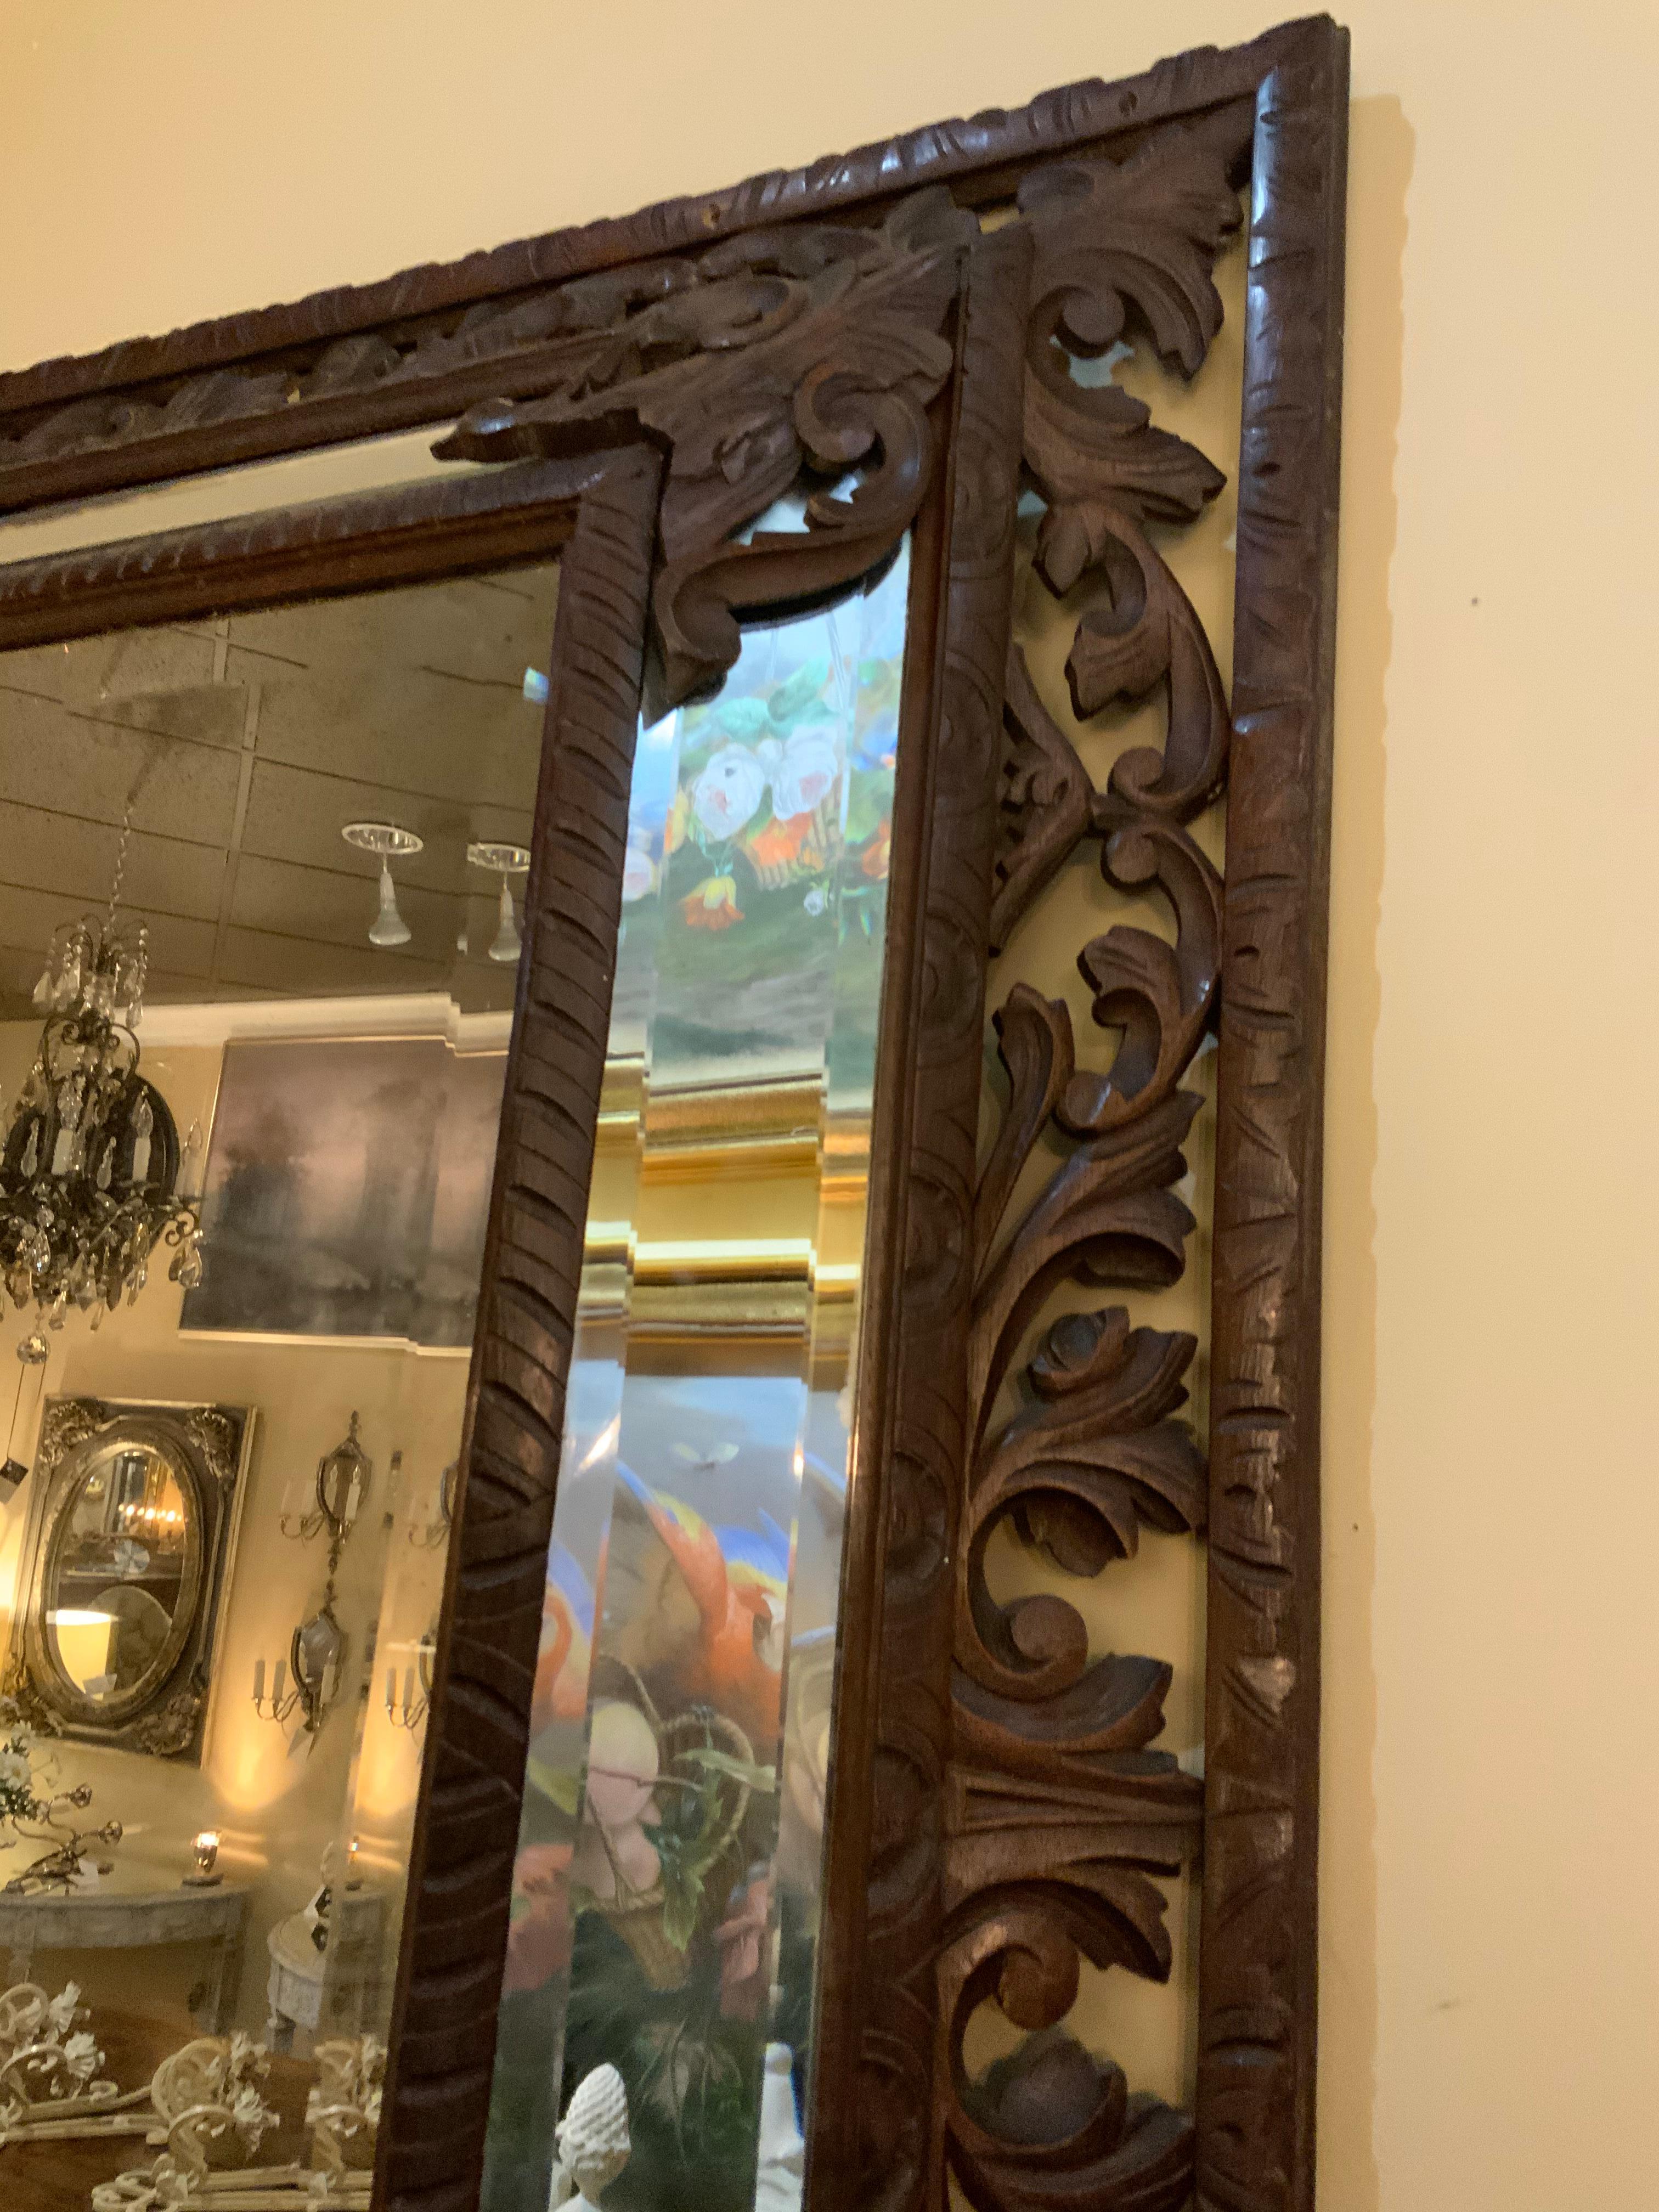 Well carved and beautifully beveled mirror found in Spain. Open reticulated carving makes this
Piece especially appealing. The interior mirror is projected and framed inset with a beveled mirror.